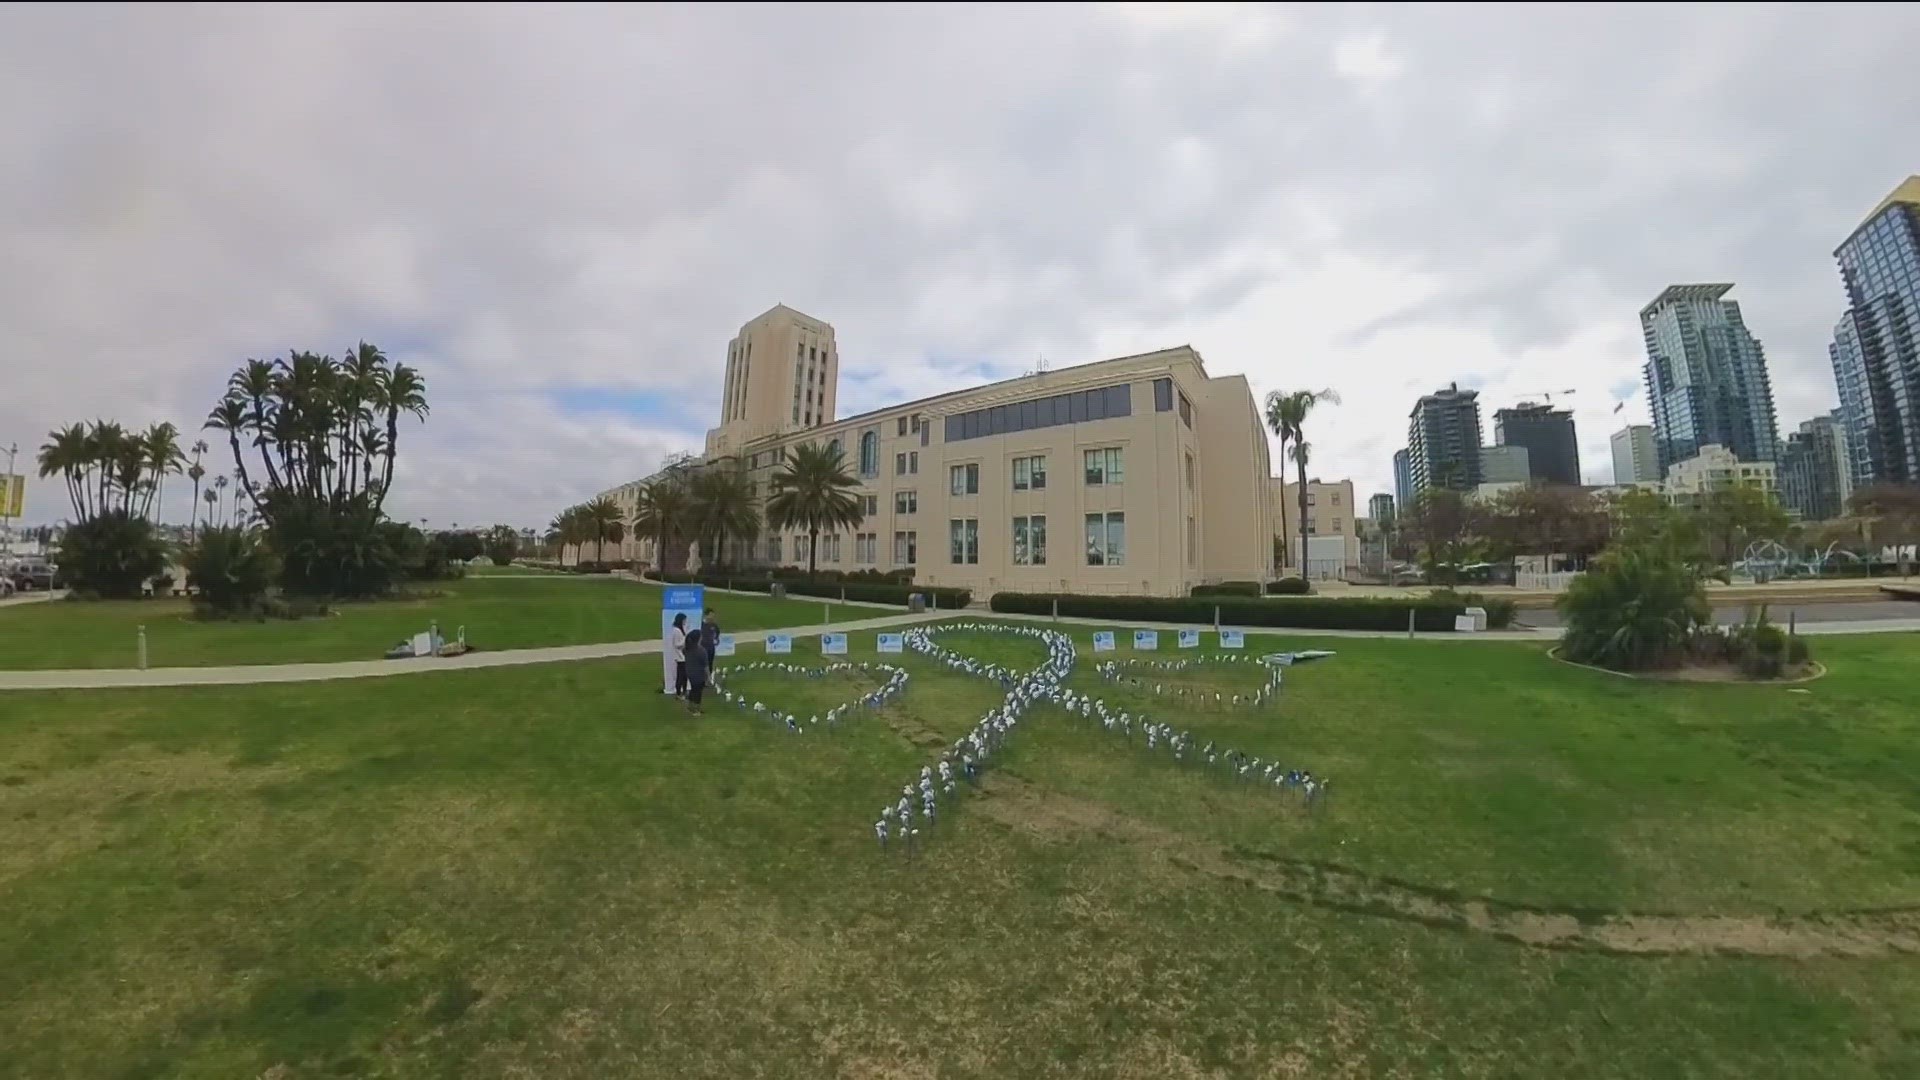 The organization Promises2Kids put up pinwheels outside the county administration center to raise awareness of child abuse.